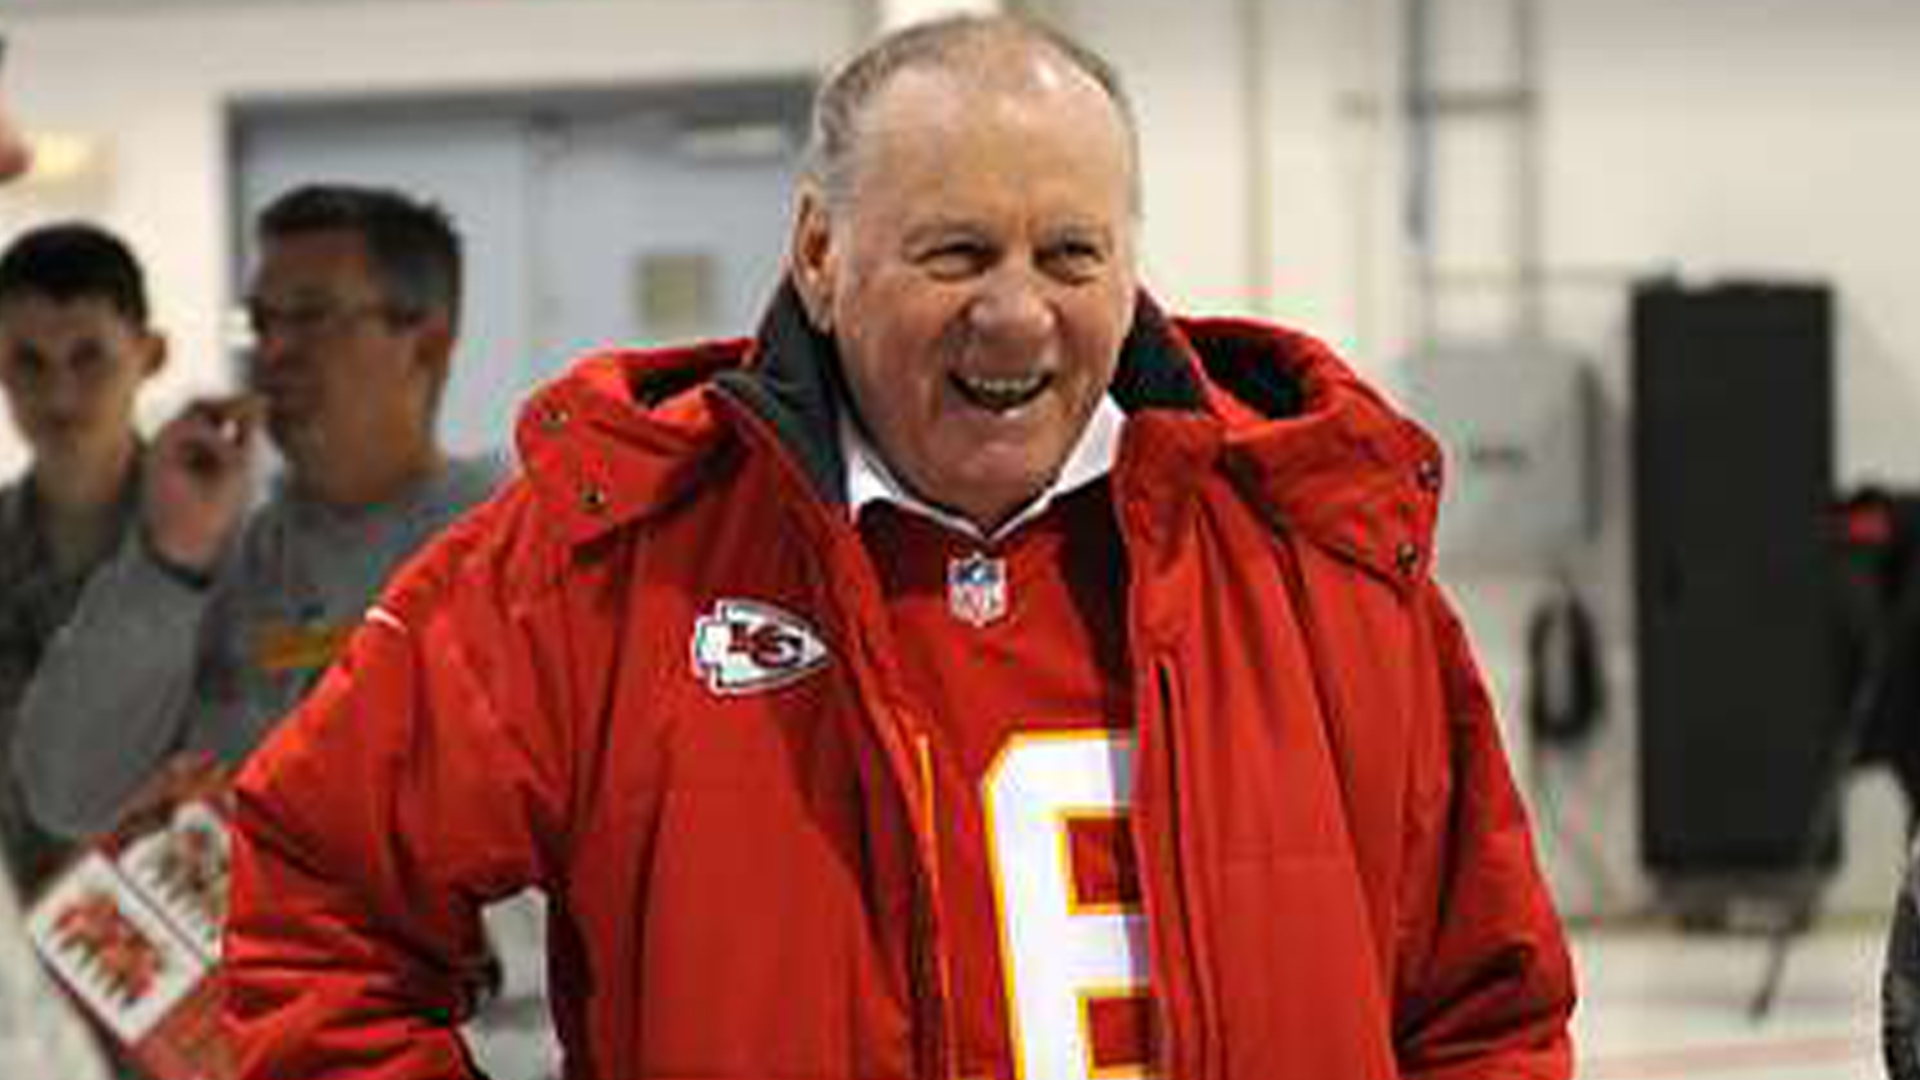 Retired Kansas City Chiefs quarterback Len Dawson laughs while meeting with members of Team Whiteman at Whiteman Air Force Base, Mo., Nov. 18, 2014. Dawson was the fifth overall pick in the 1957 NFL draft by the Pittsburgh Steelers. (U.S. Air Force photo by Airman 1st Class Joel Pfiester/Released)